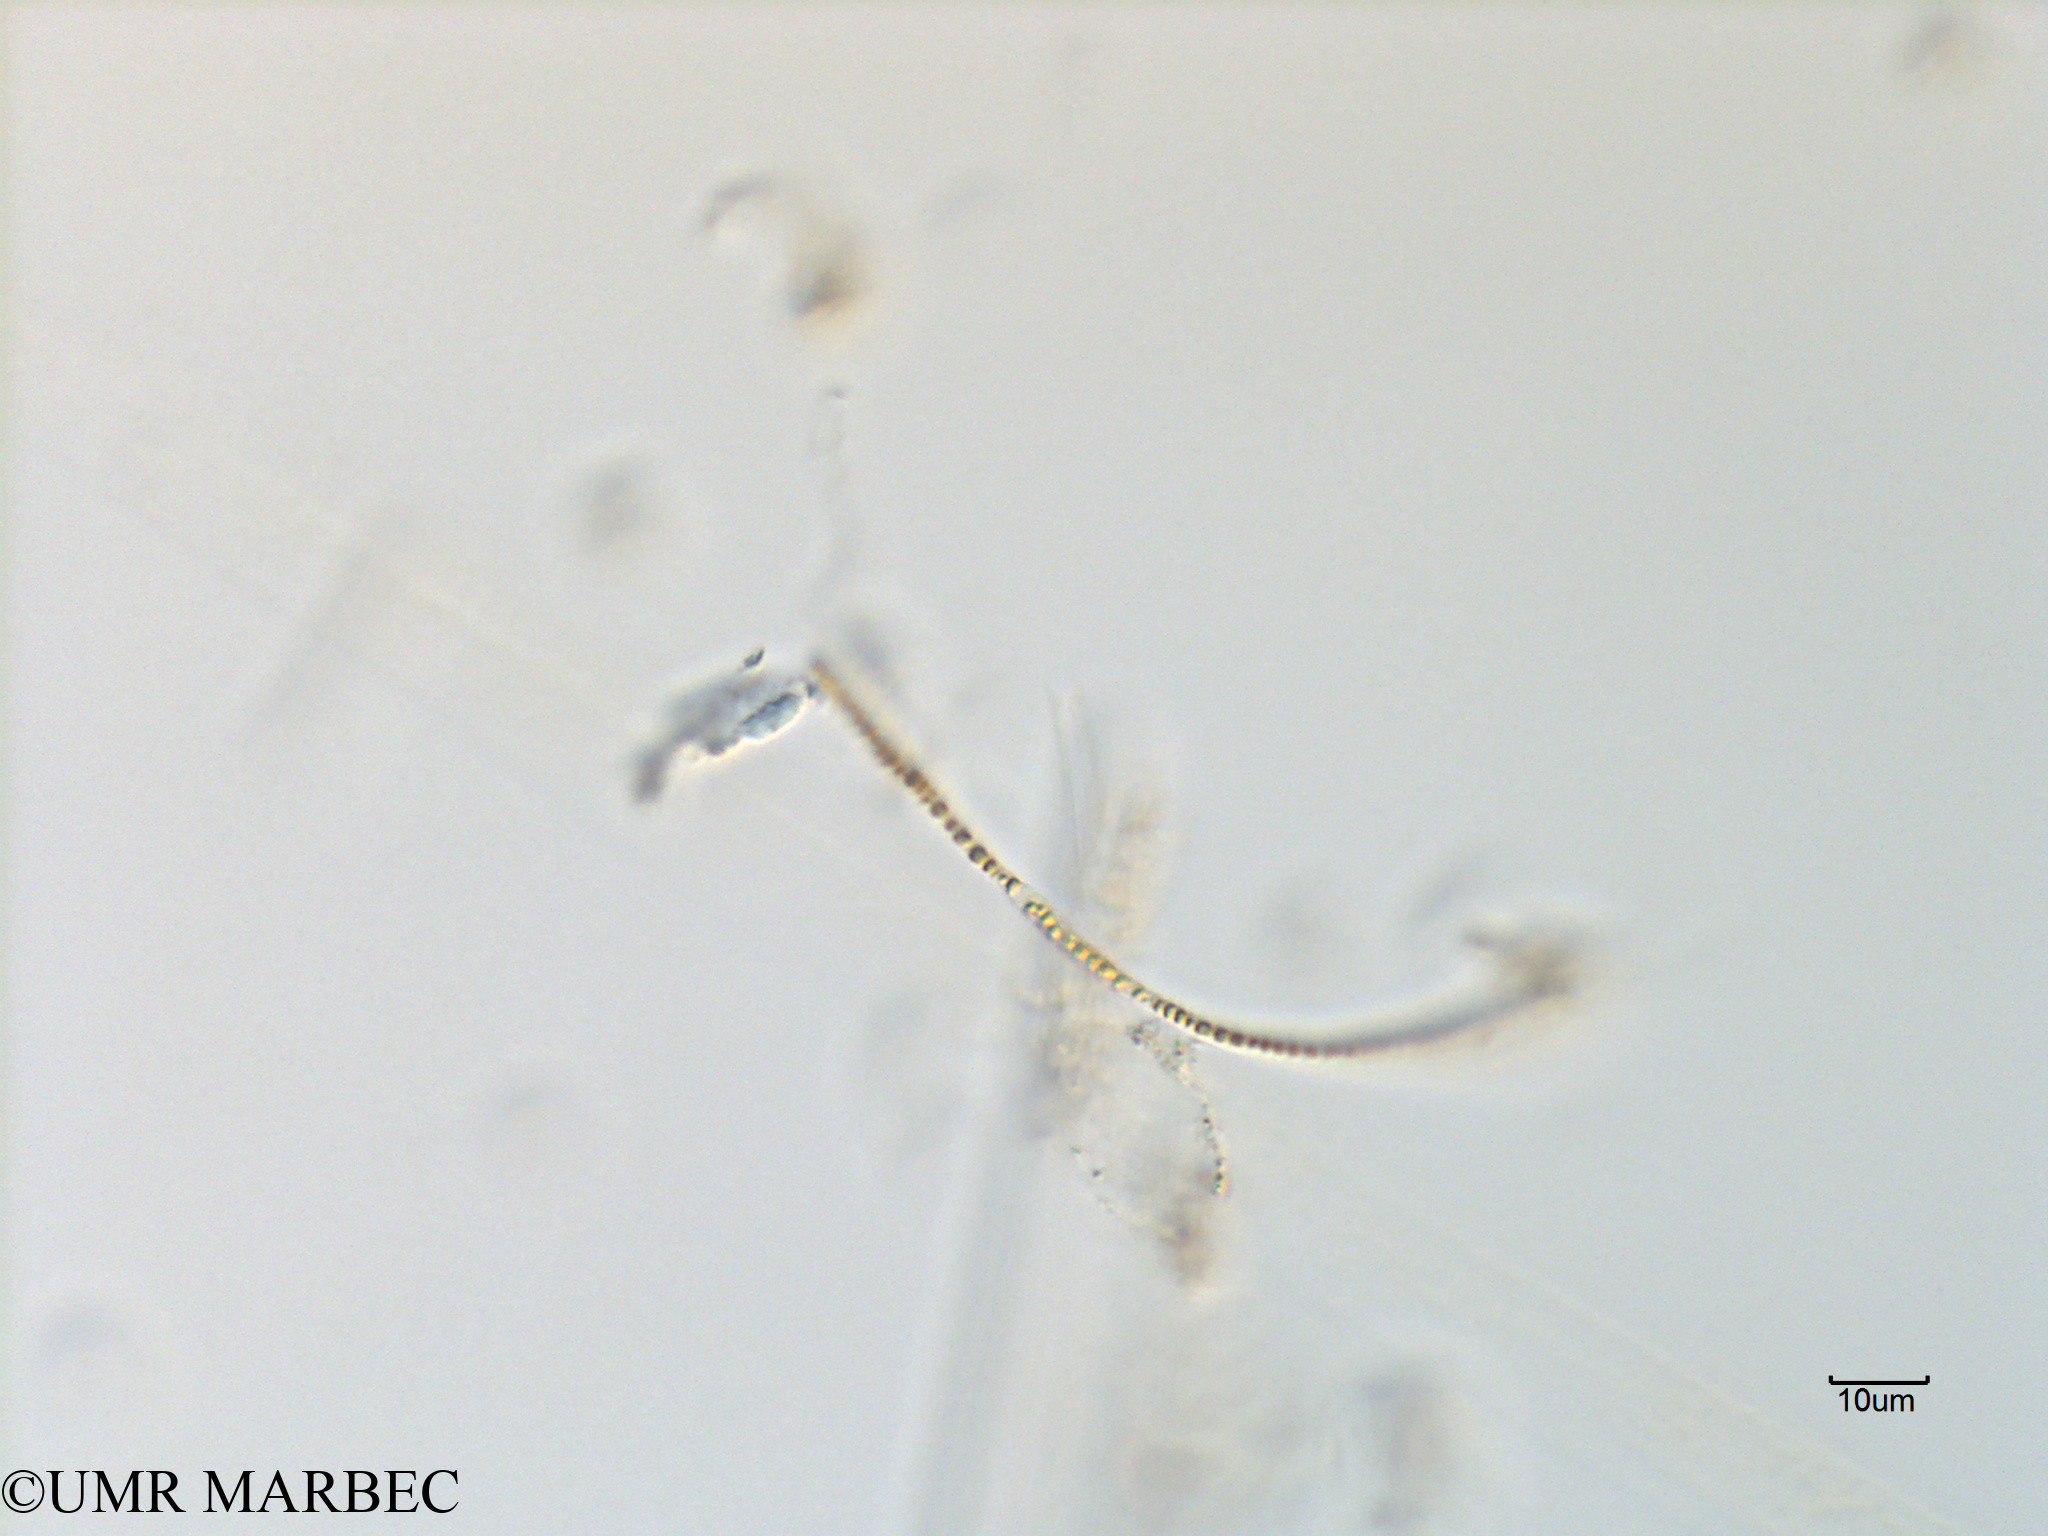 phyto/Scattered_Islands/mayotte_lagoon/SIREME May 2016/Oscillatoriale spp (MAY11_cyano2-2).tif(copy).jpg